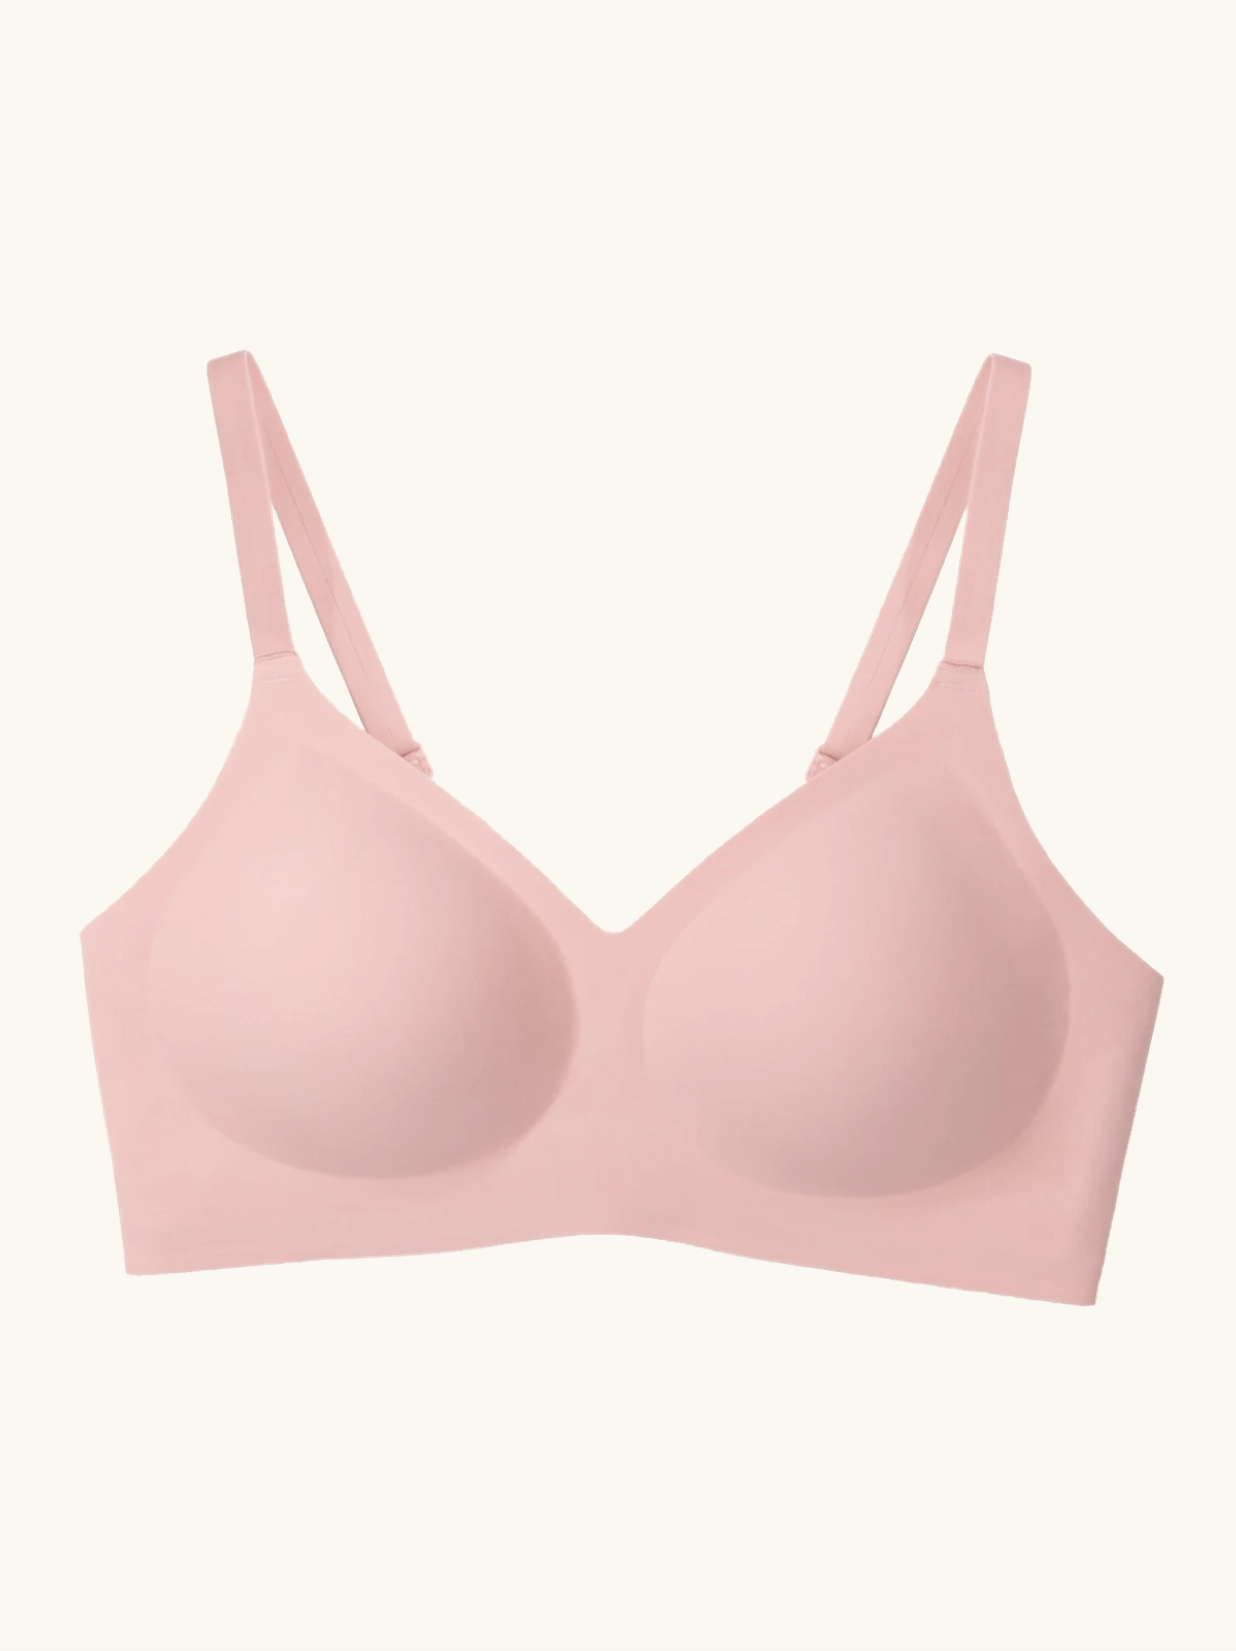 Heather Grey Bra With Pink Bow-30A